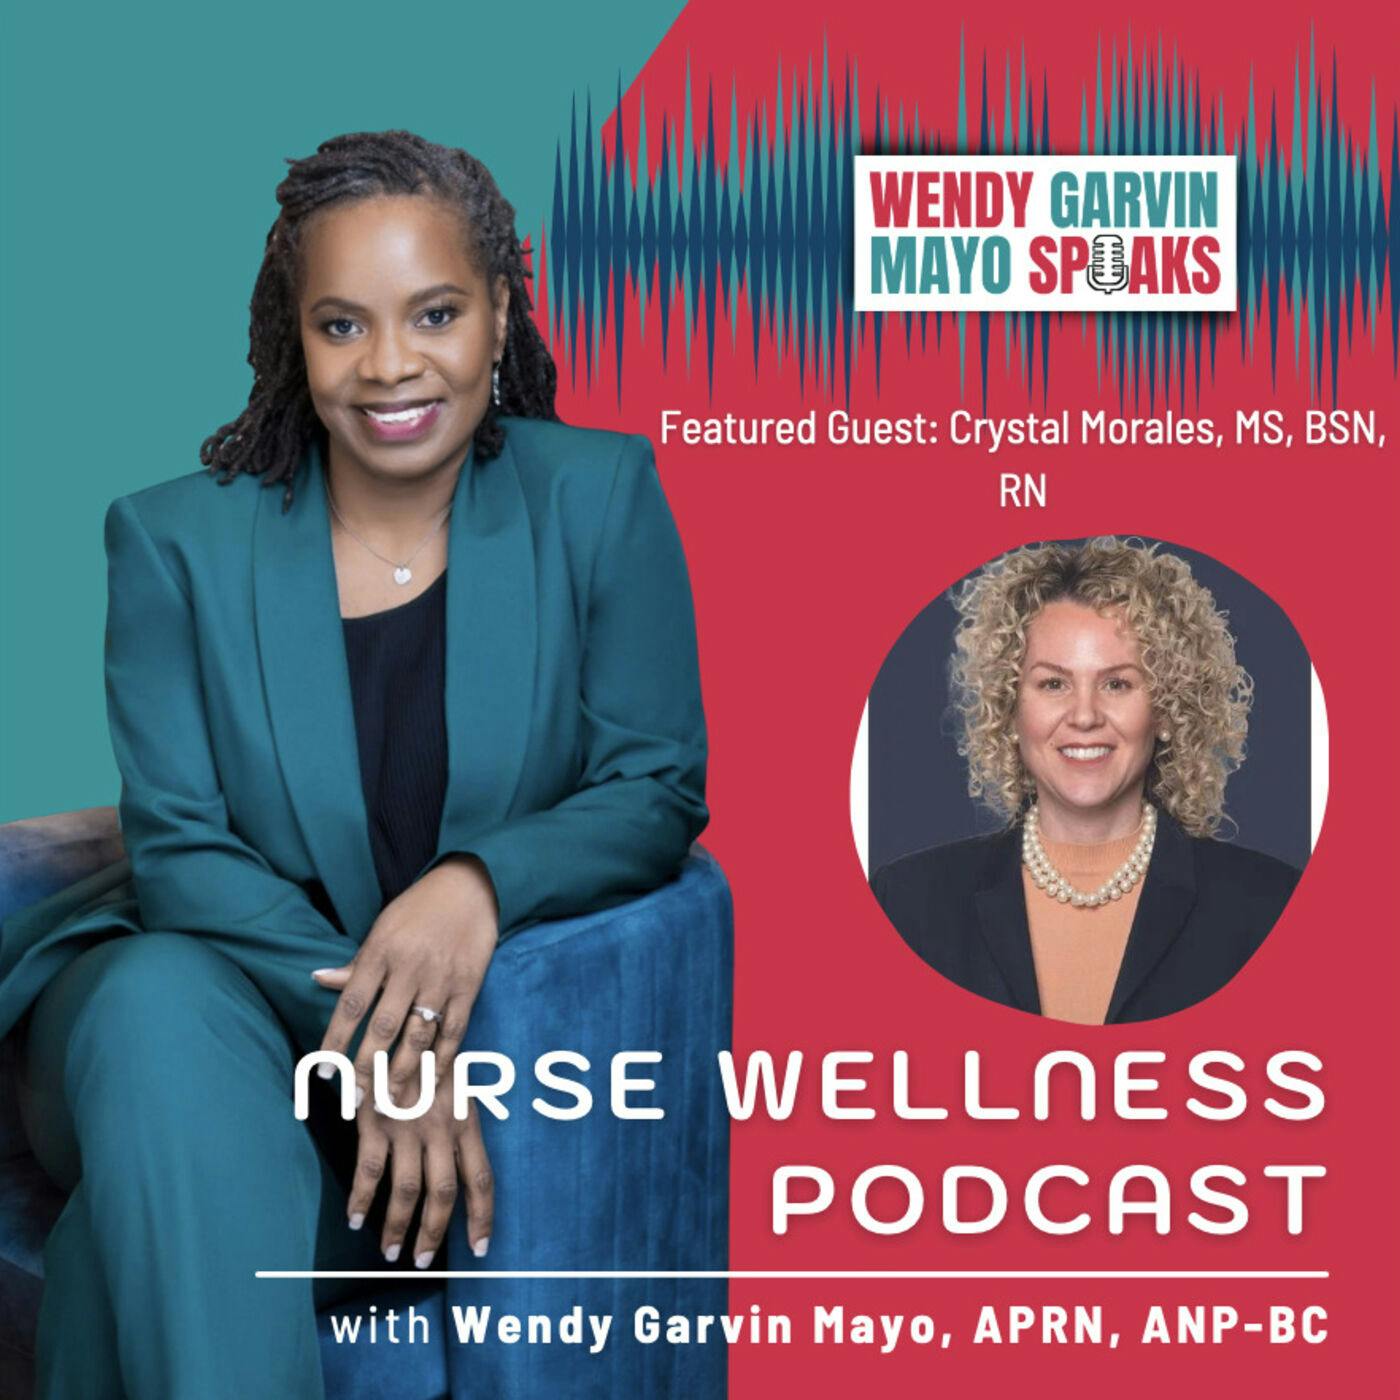 NWP: What Are the Benefits of Having a Director of Nurse Wellbeing in Your Organization? Wendy with Crystal Morales, MS, BSN, RN